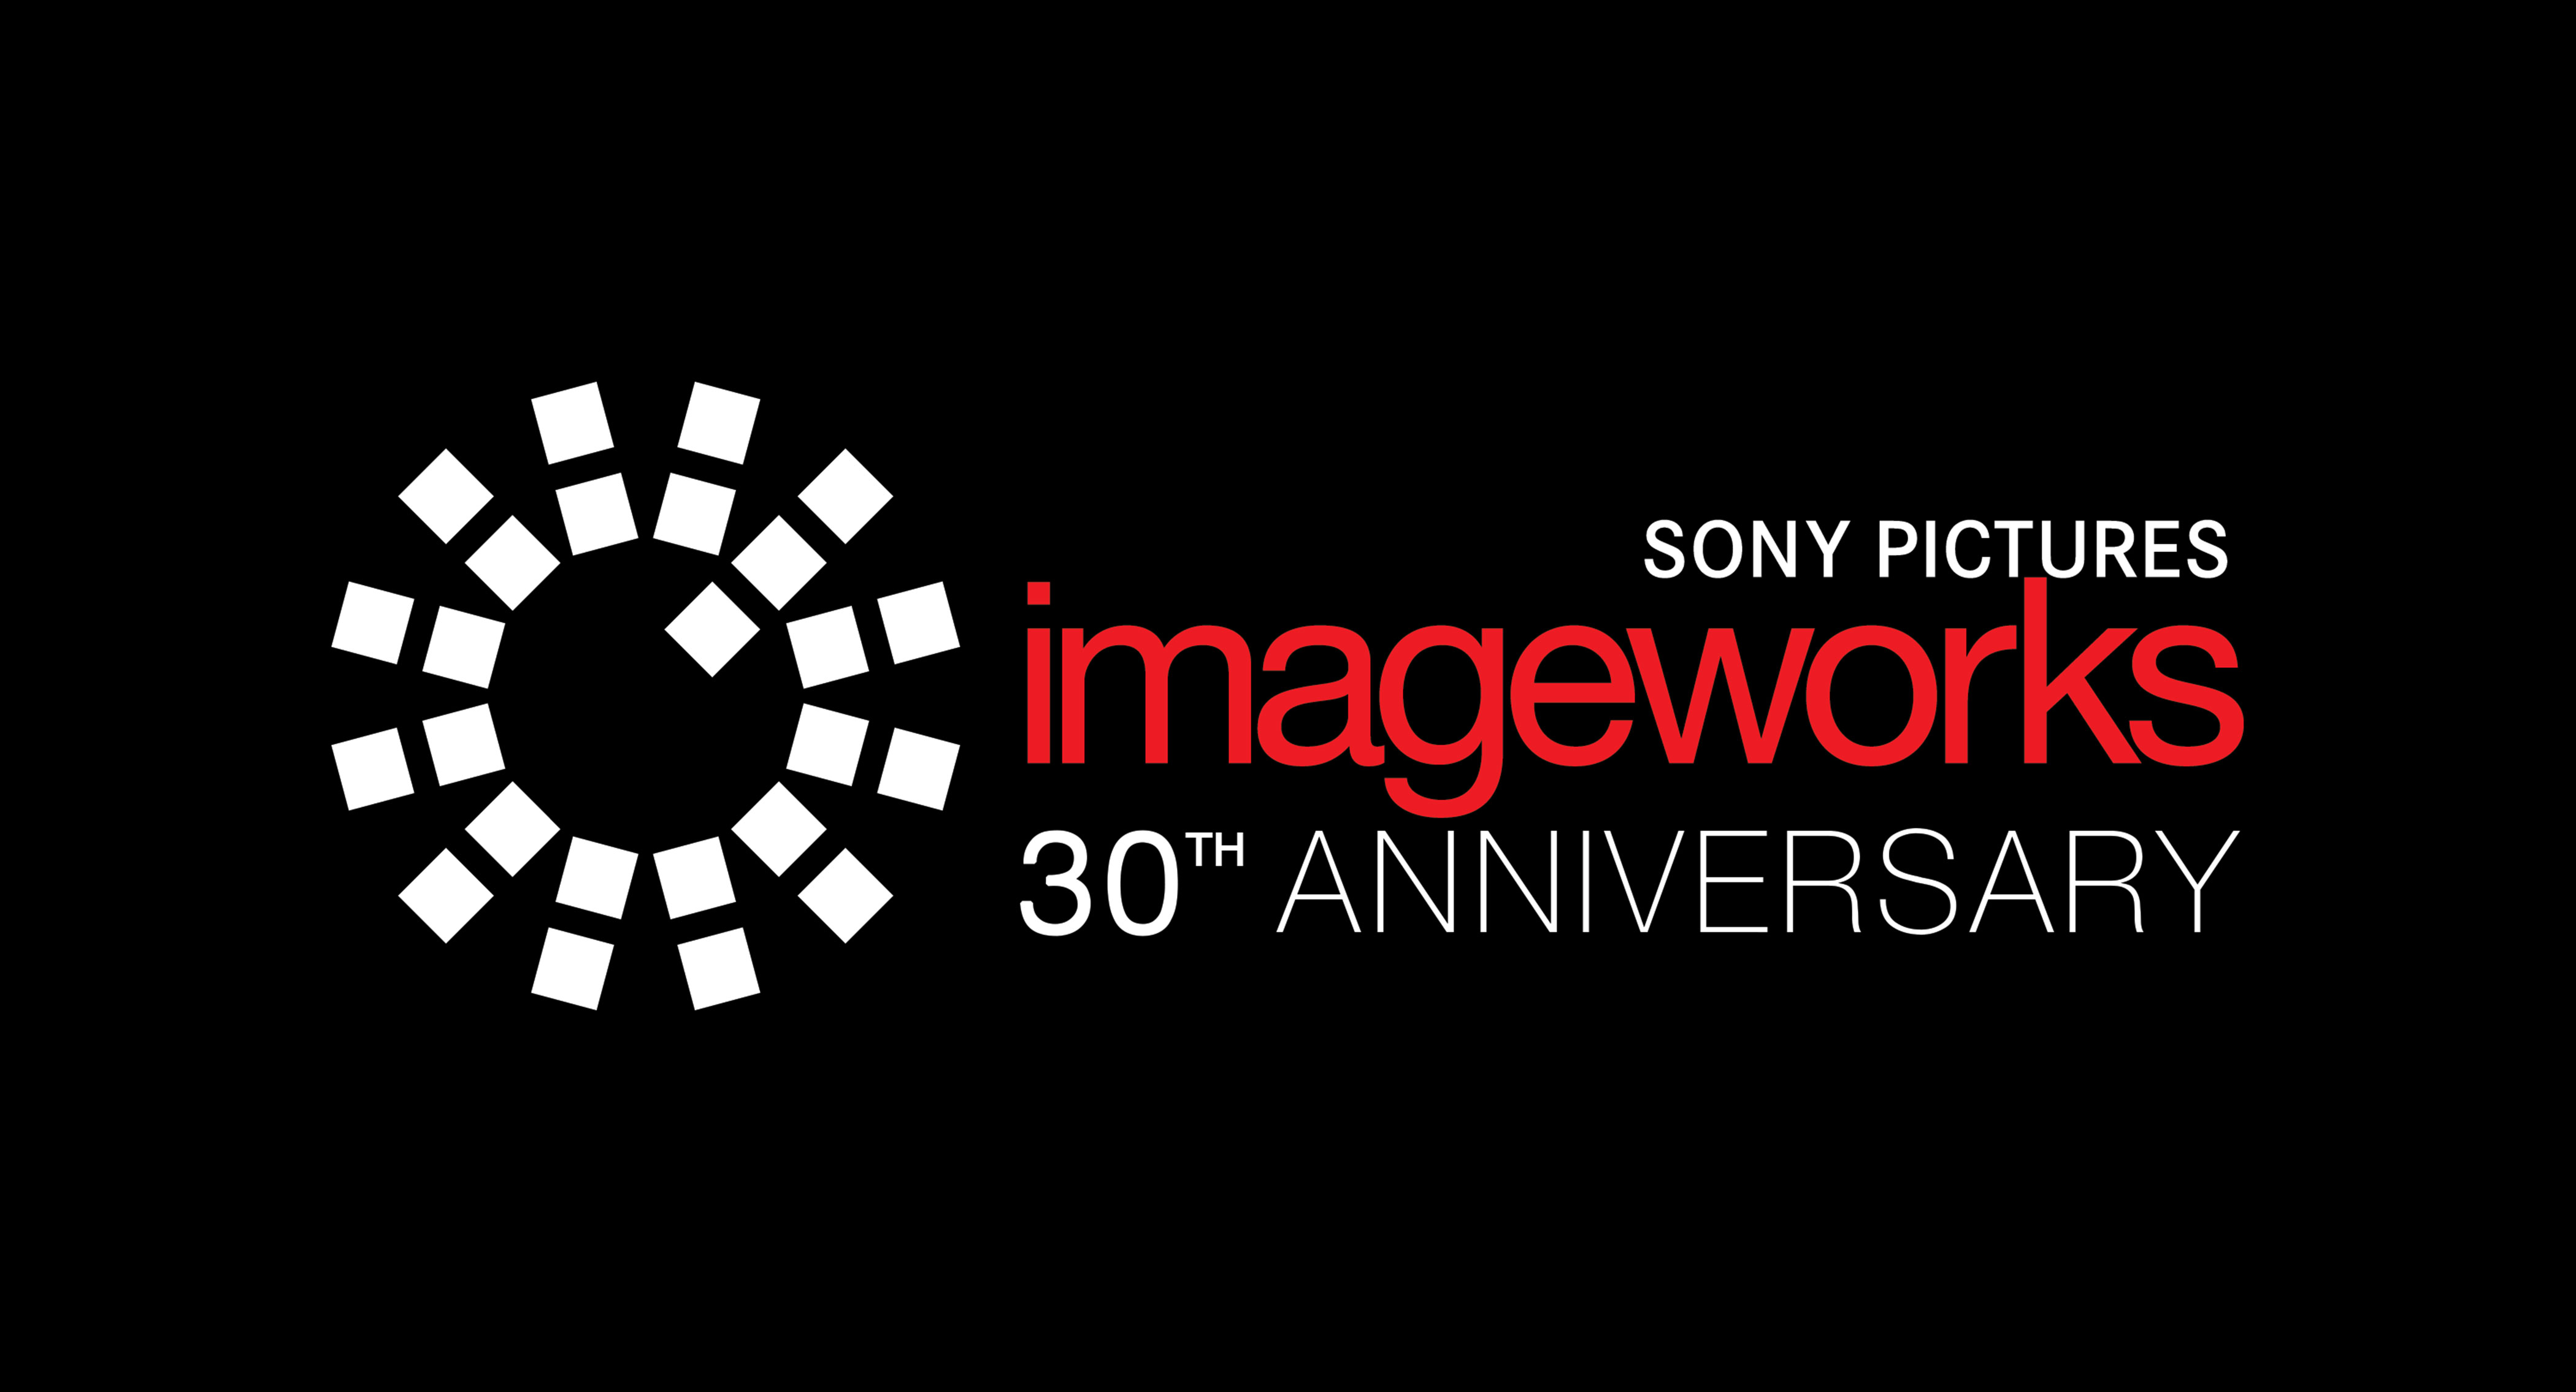 Sony Pictures Imageworks 30th Anniversary